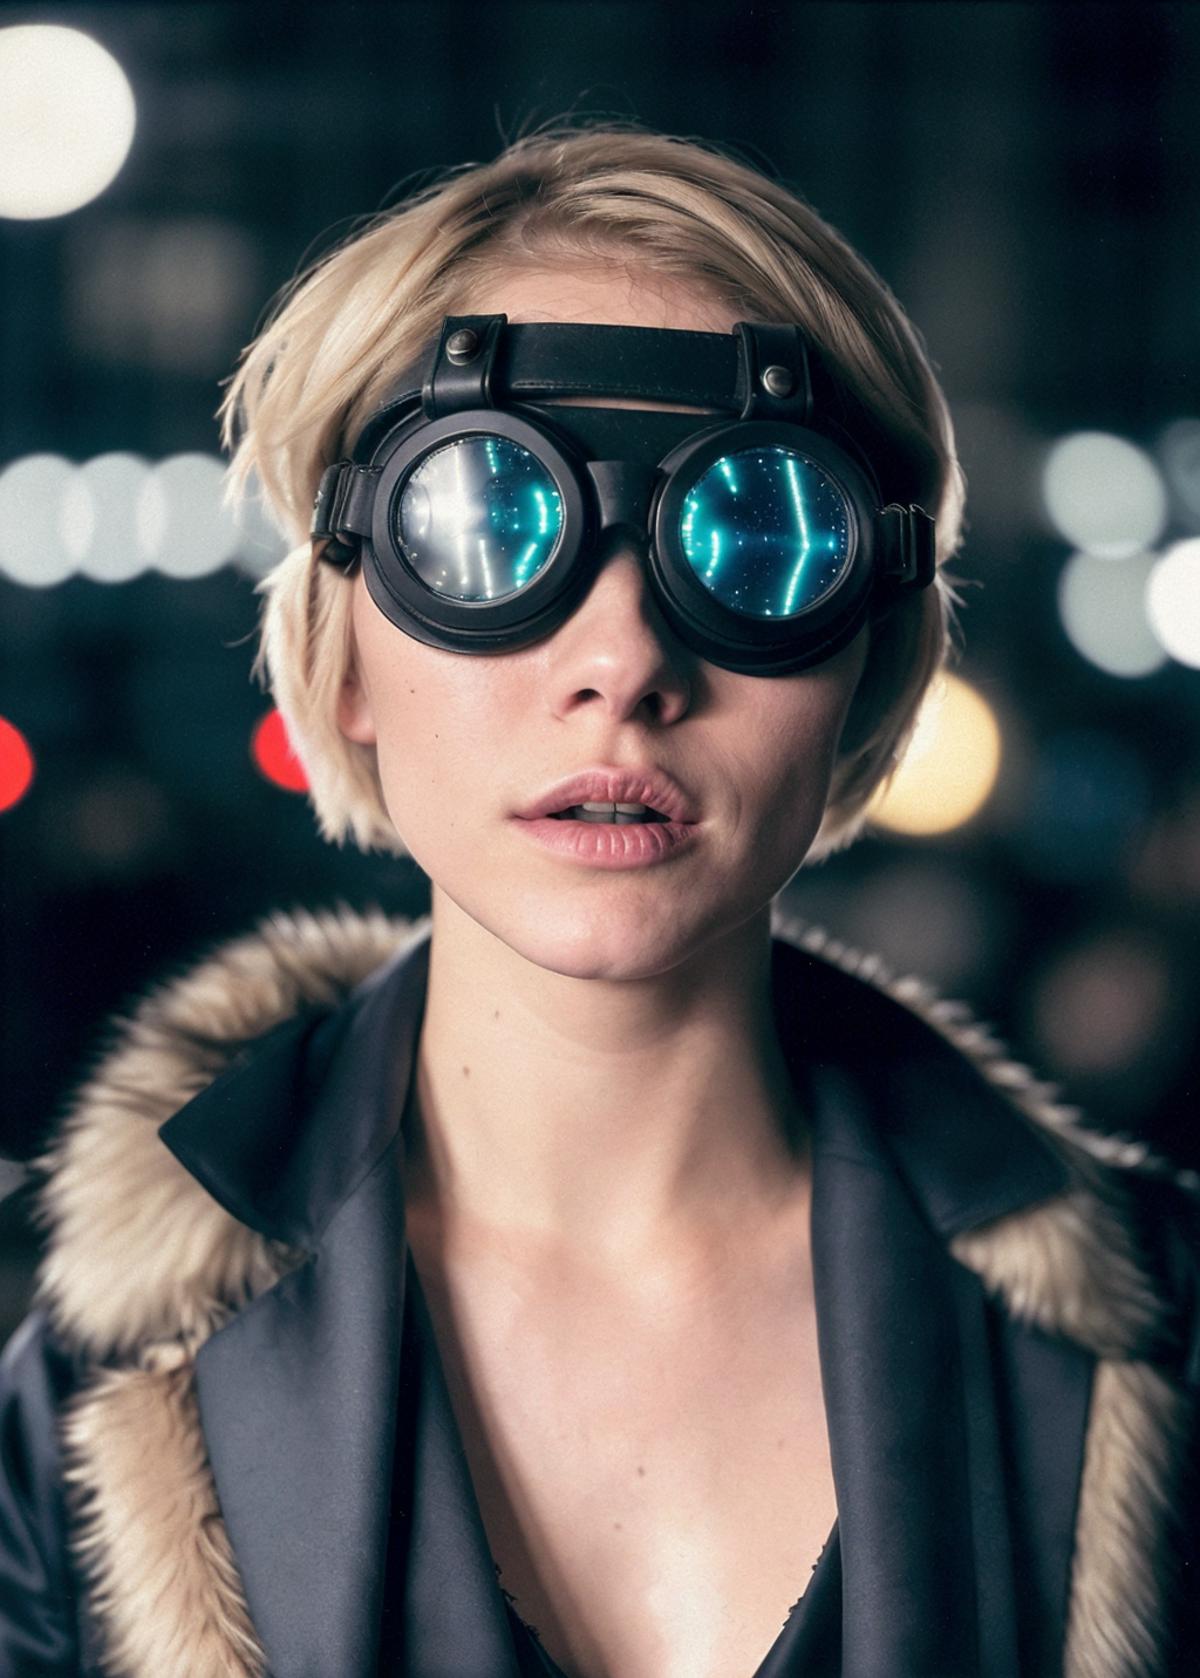 A woman wearing a black jacket and goggles.